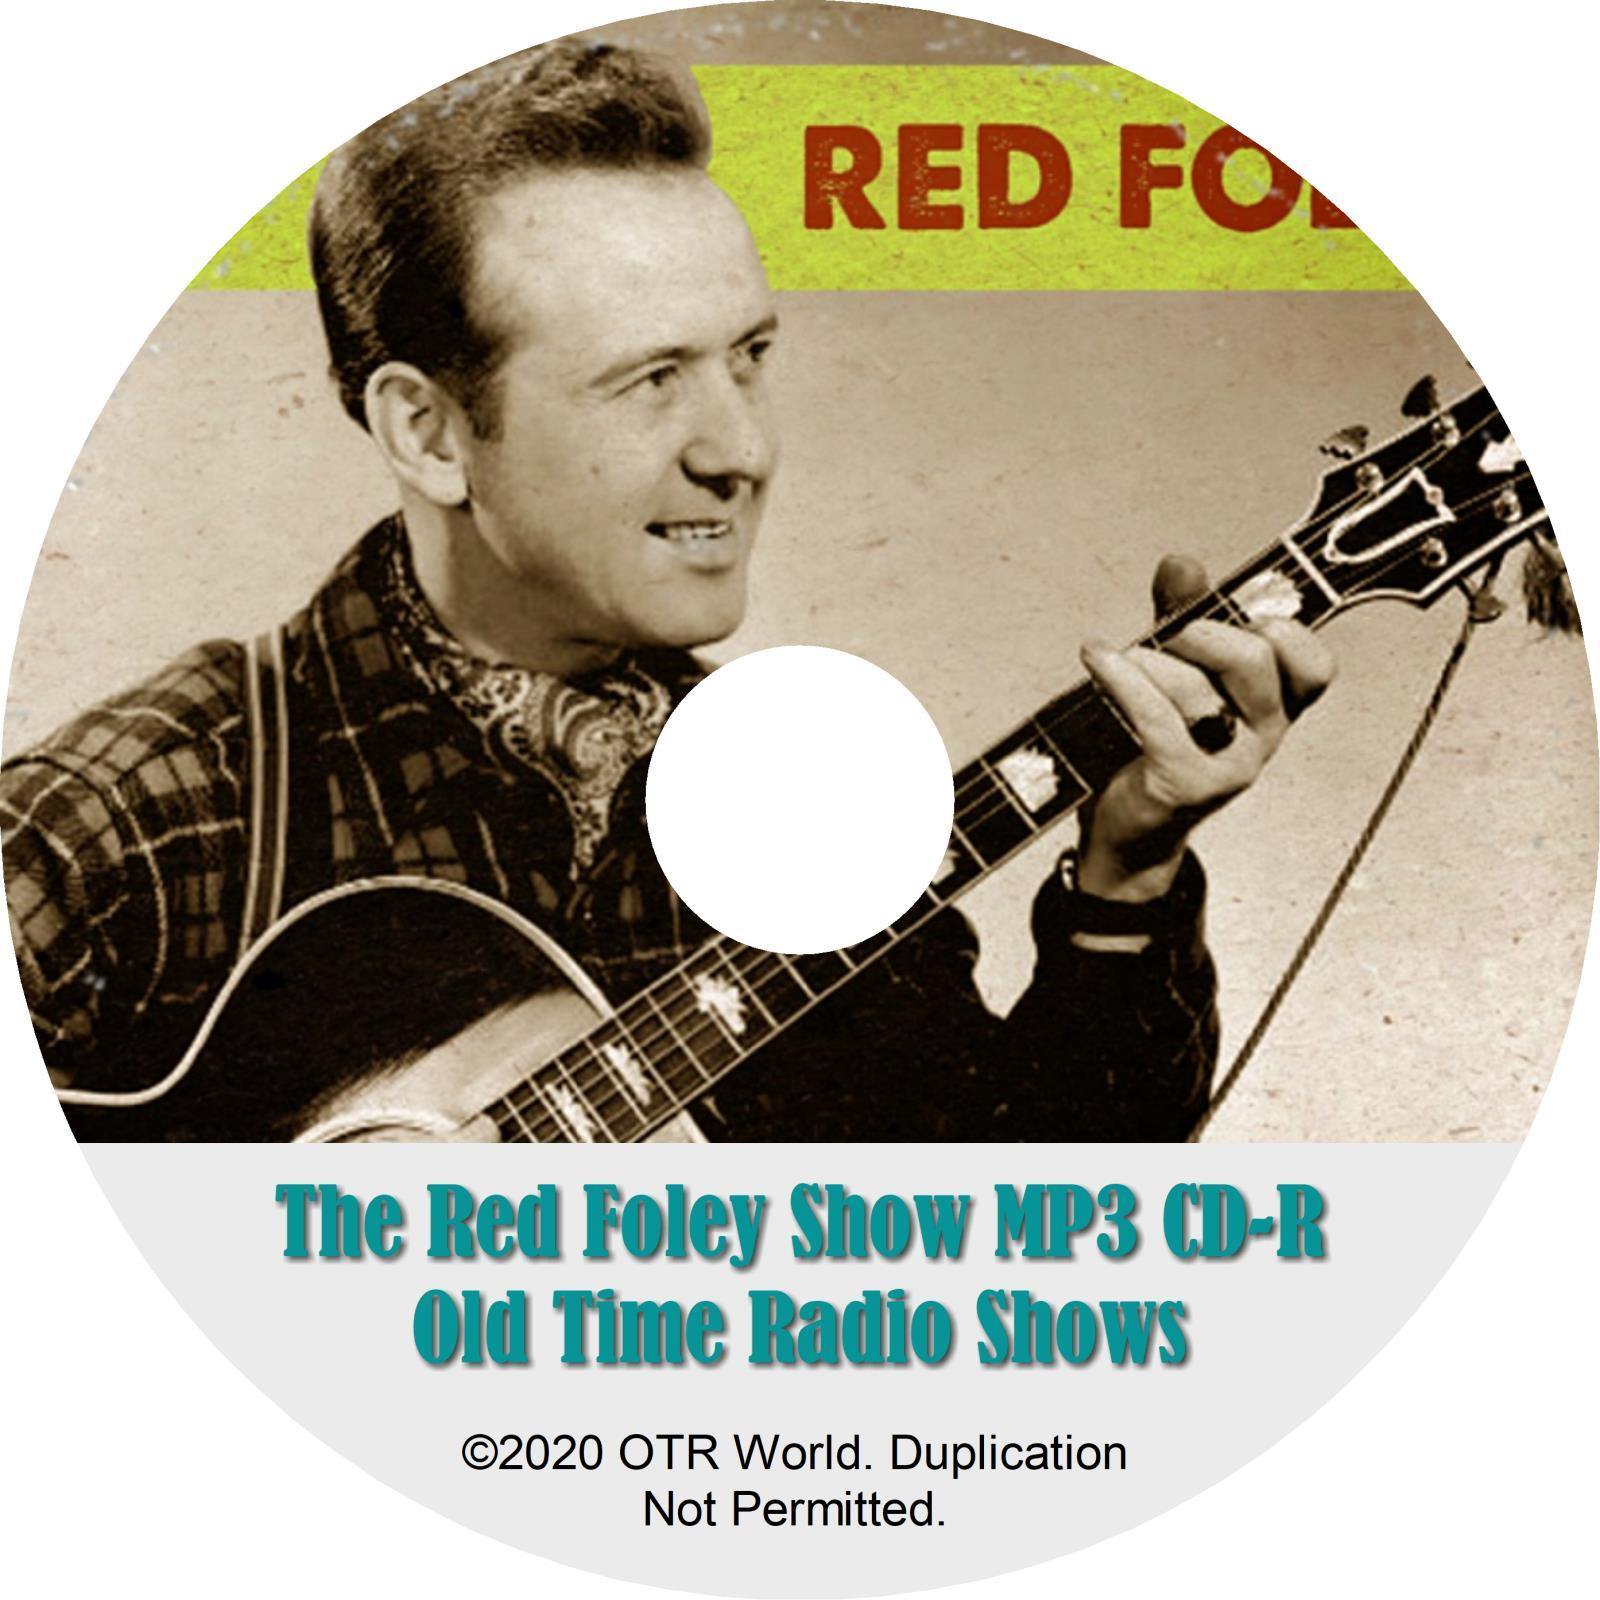 The Red Foley Show OTR OTRS Old Time Radio Shows MP3 CD-R 8 Episodes - OTR World